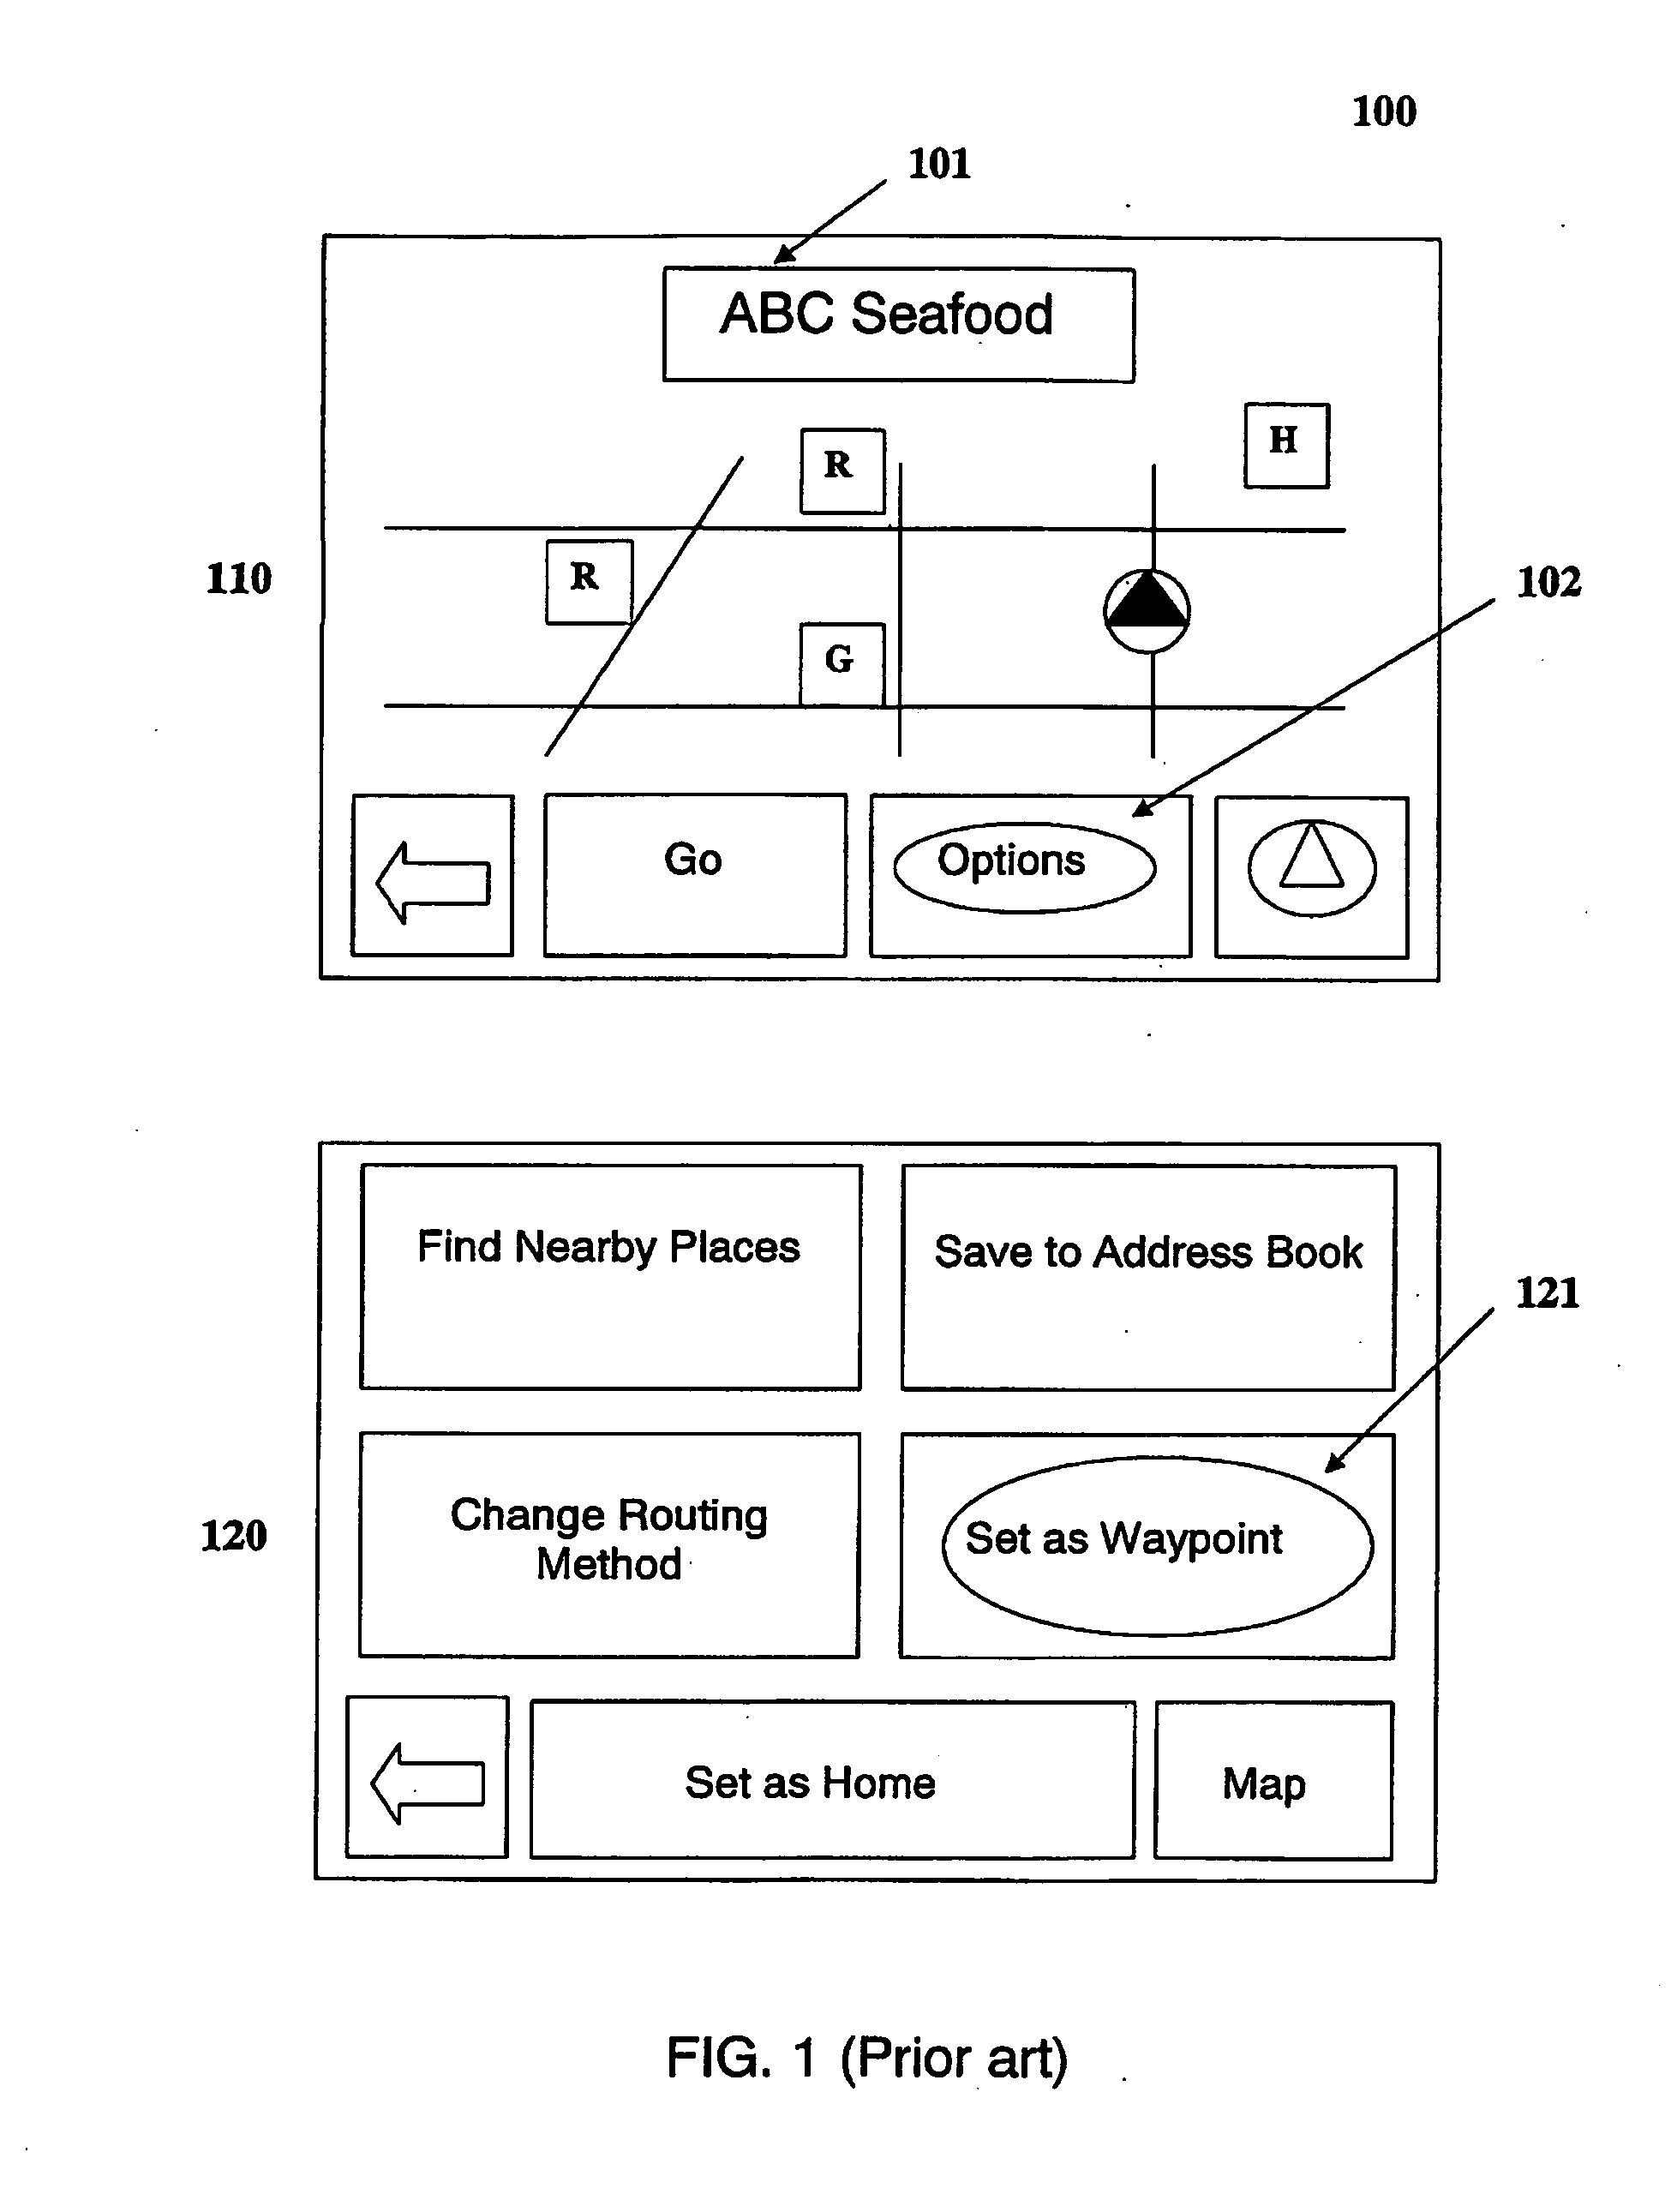 Route planning apparatus and method for navigation system